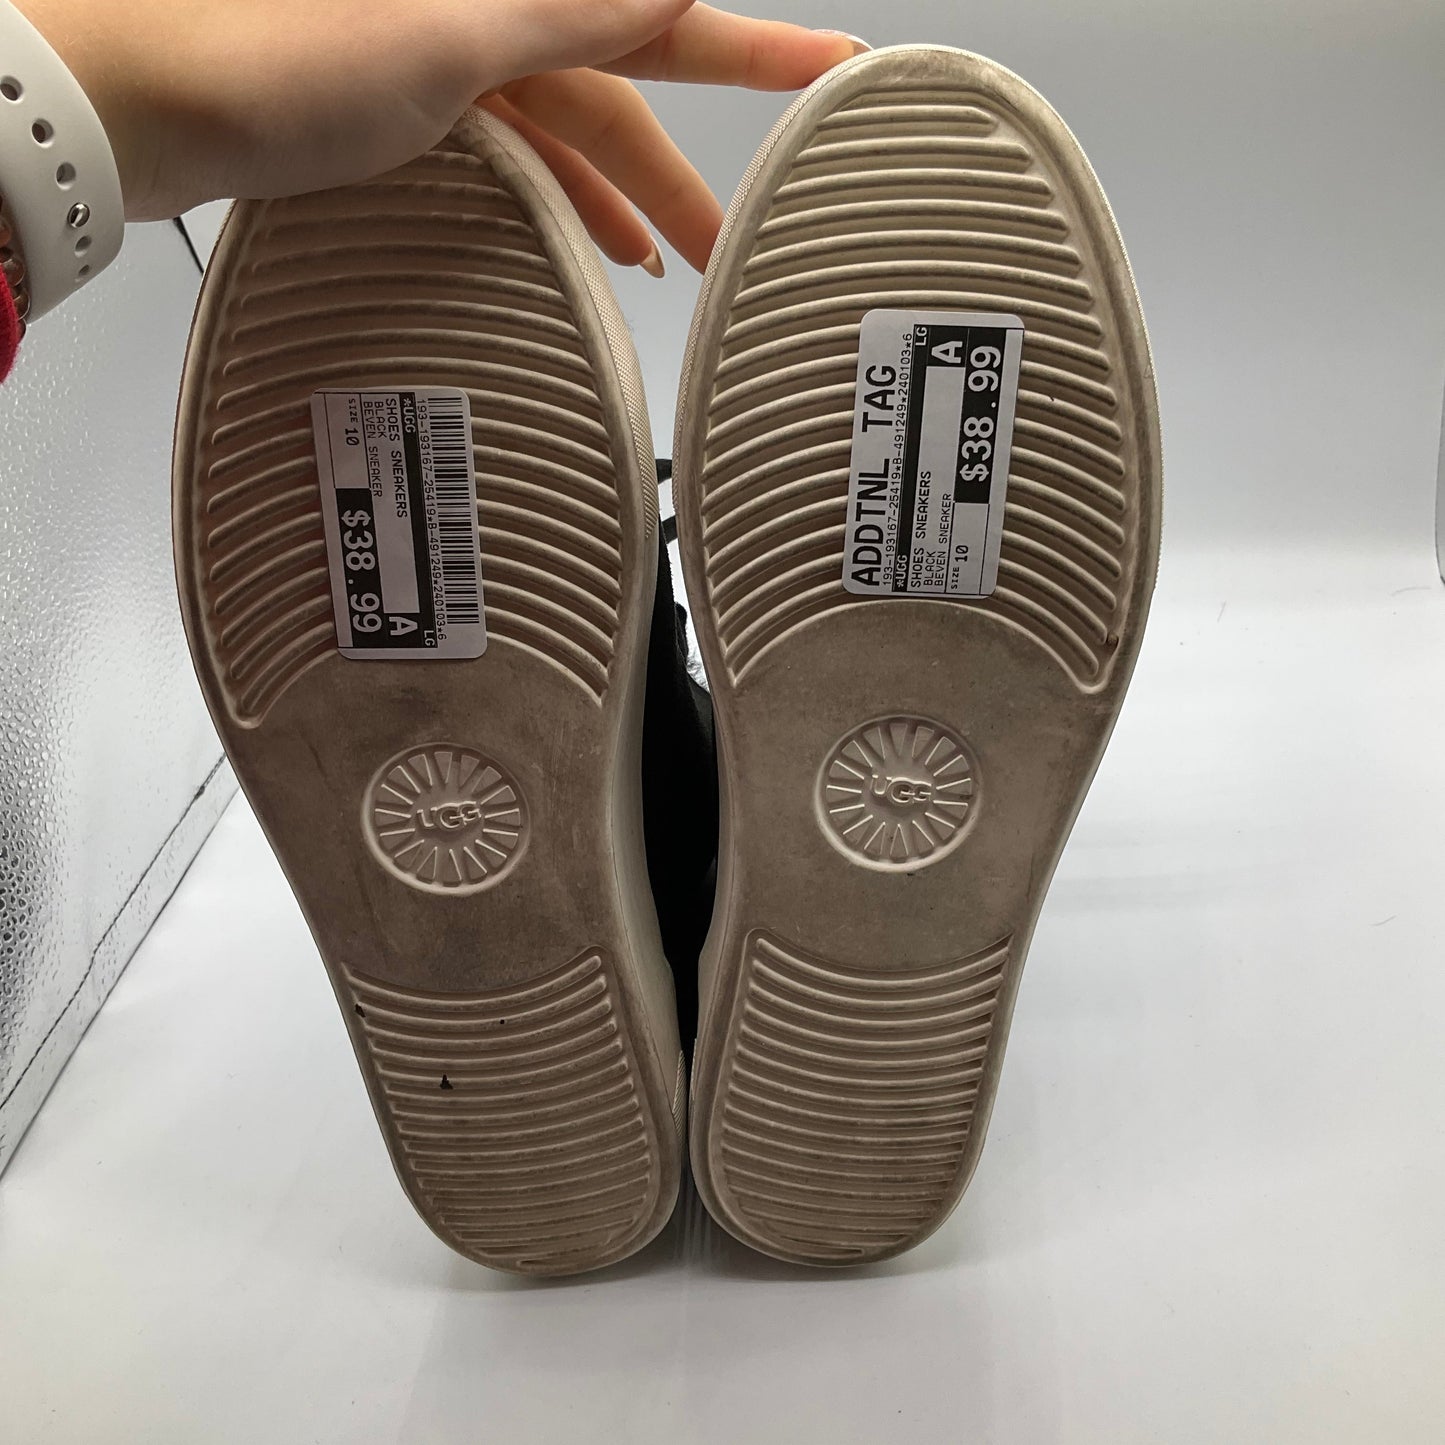 Shoes Sneakers By Ugg  Size: 10